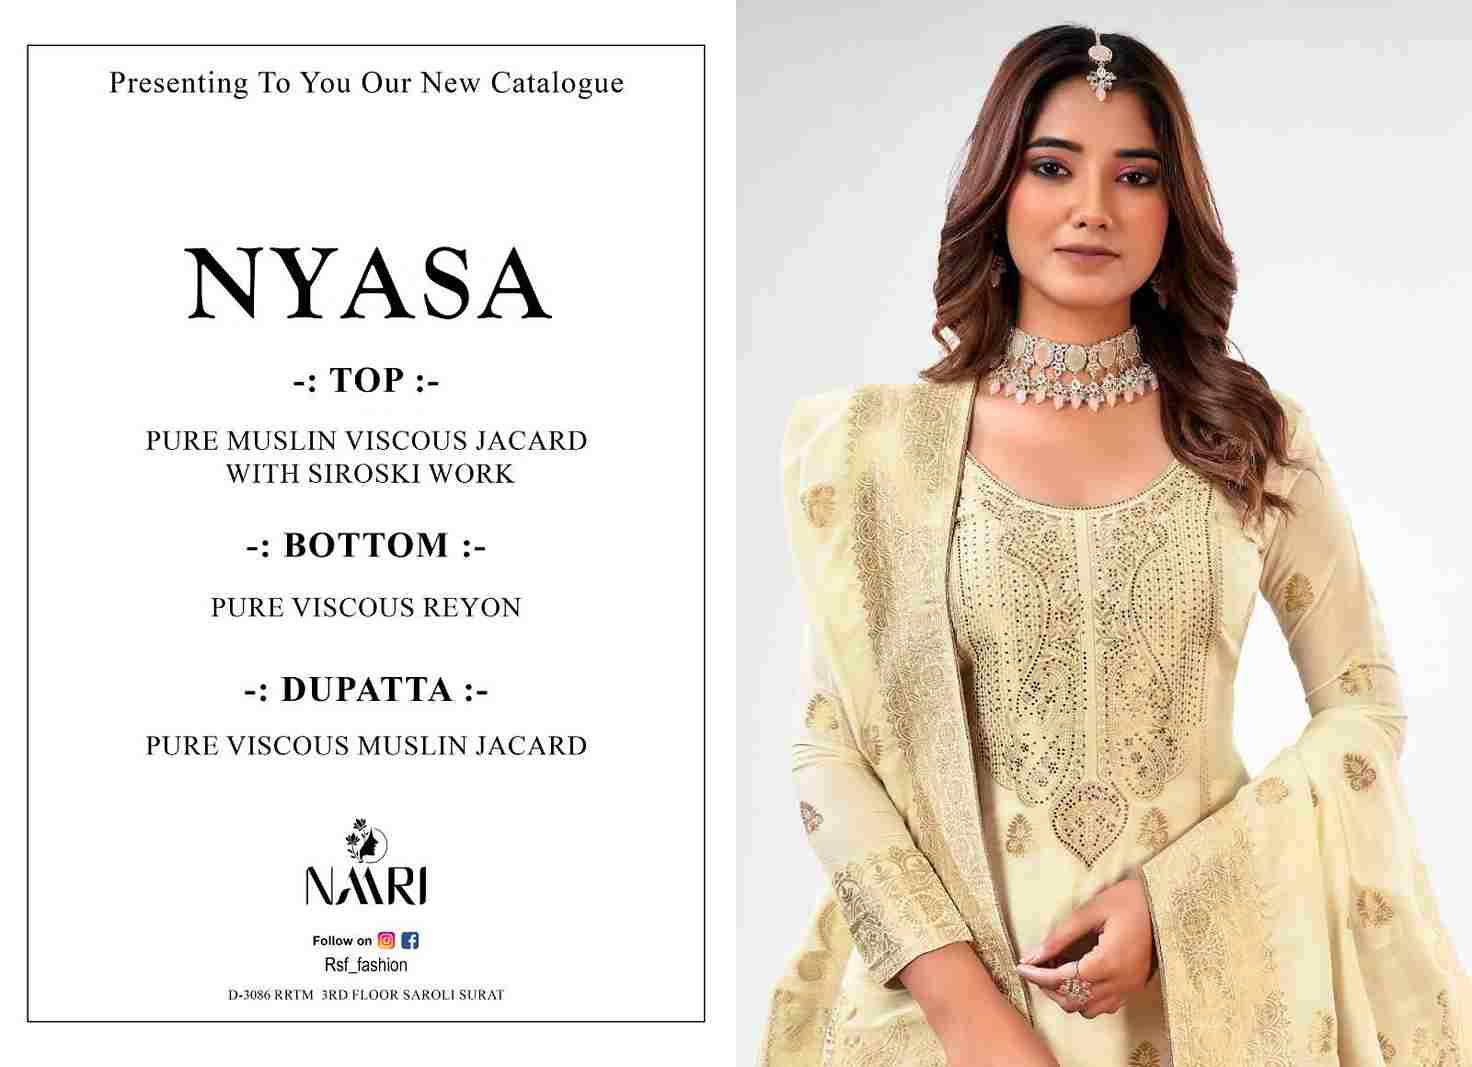 Nyasa By Naari 65001 To 65004 Series Beautiful Festive Suits Colorful Stylish Fancy Casual Wear & Ethnic Wear Muslin Viscose Jacquard Dresses At Wholesale Price